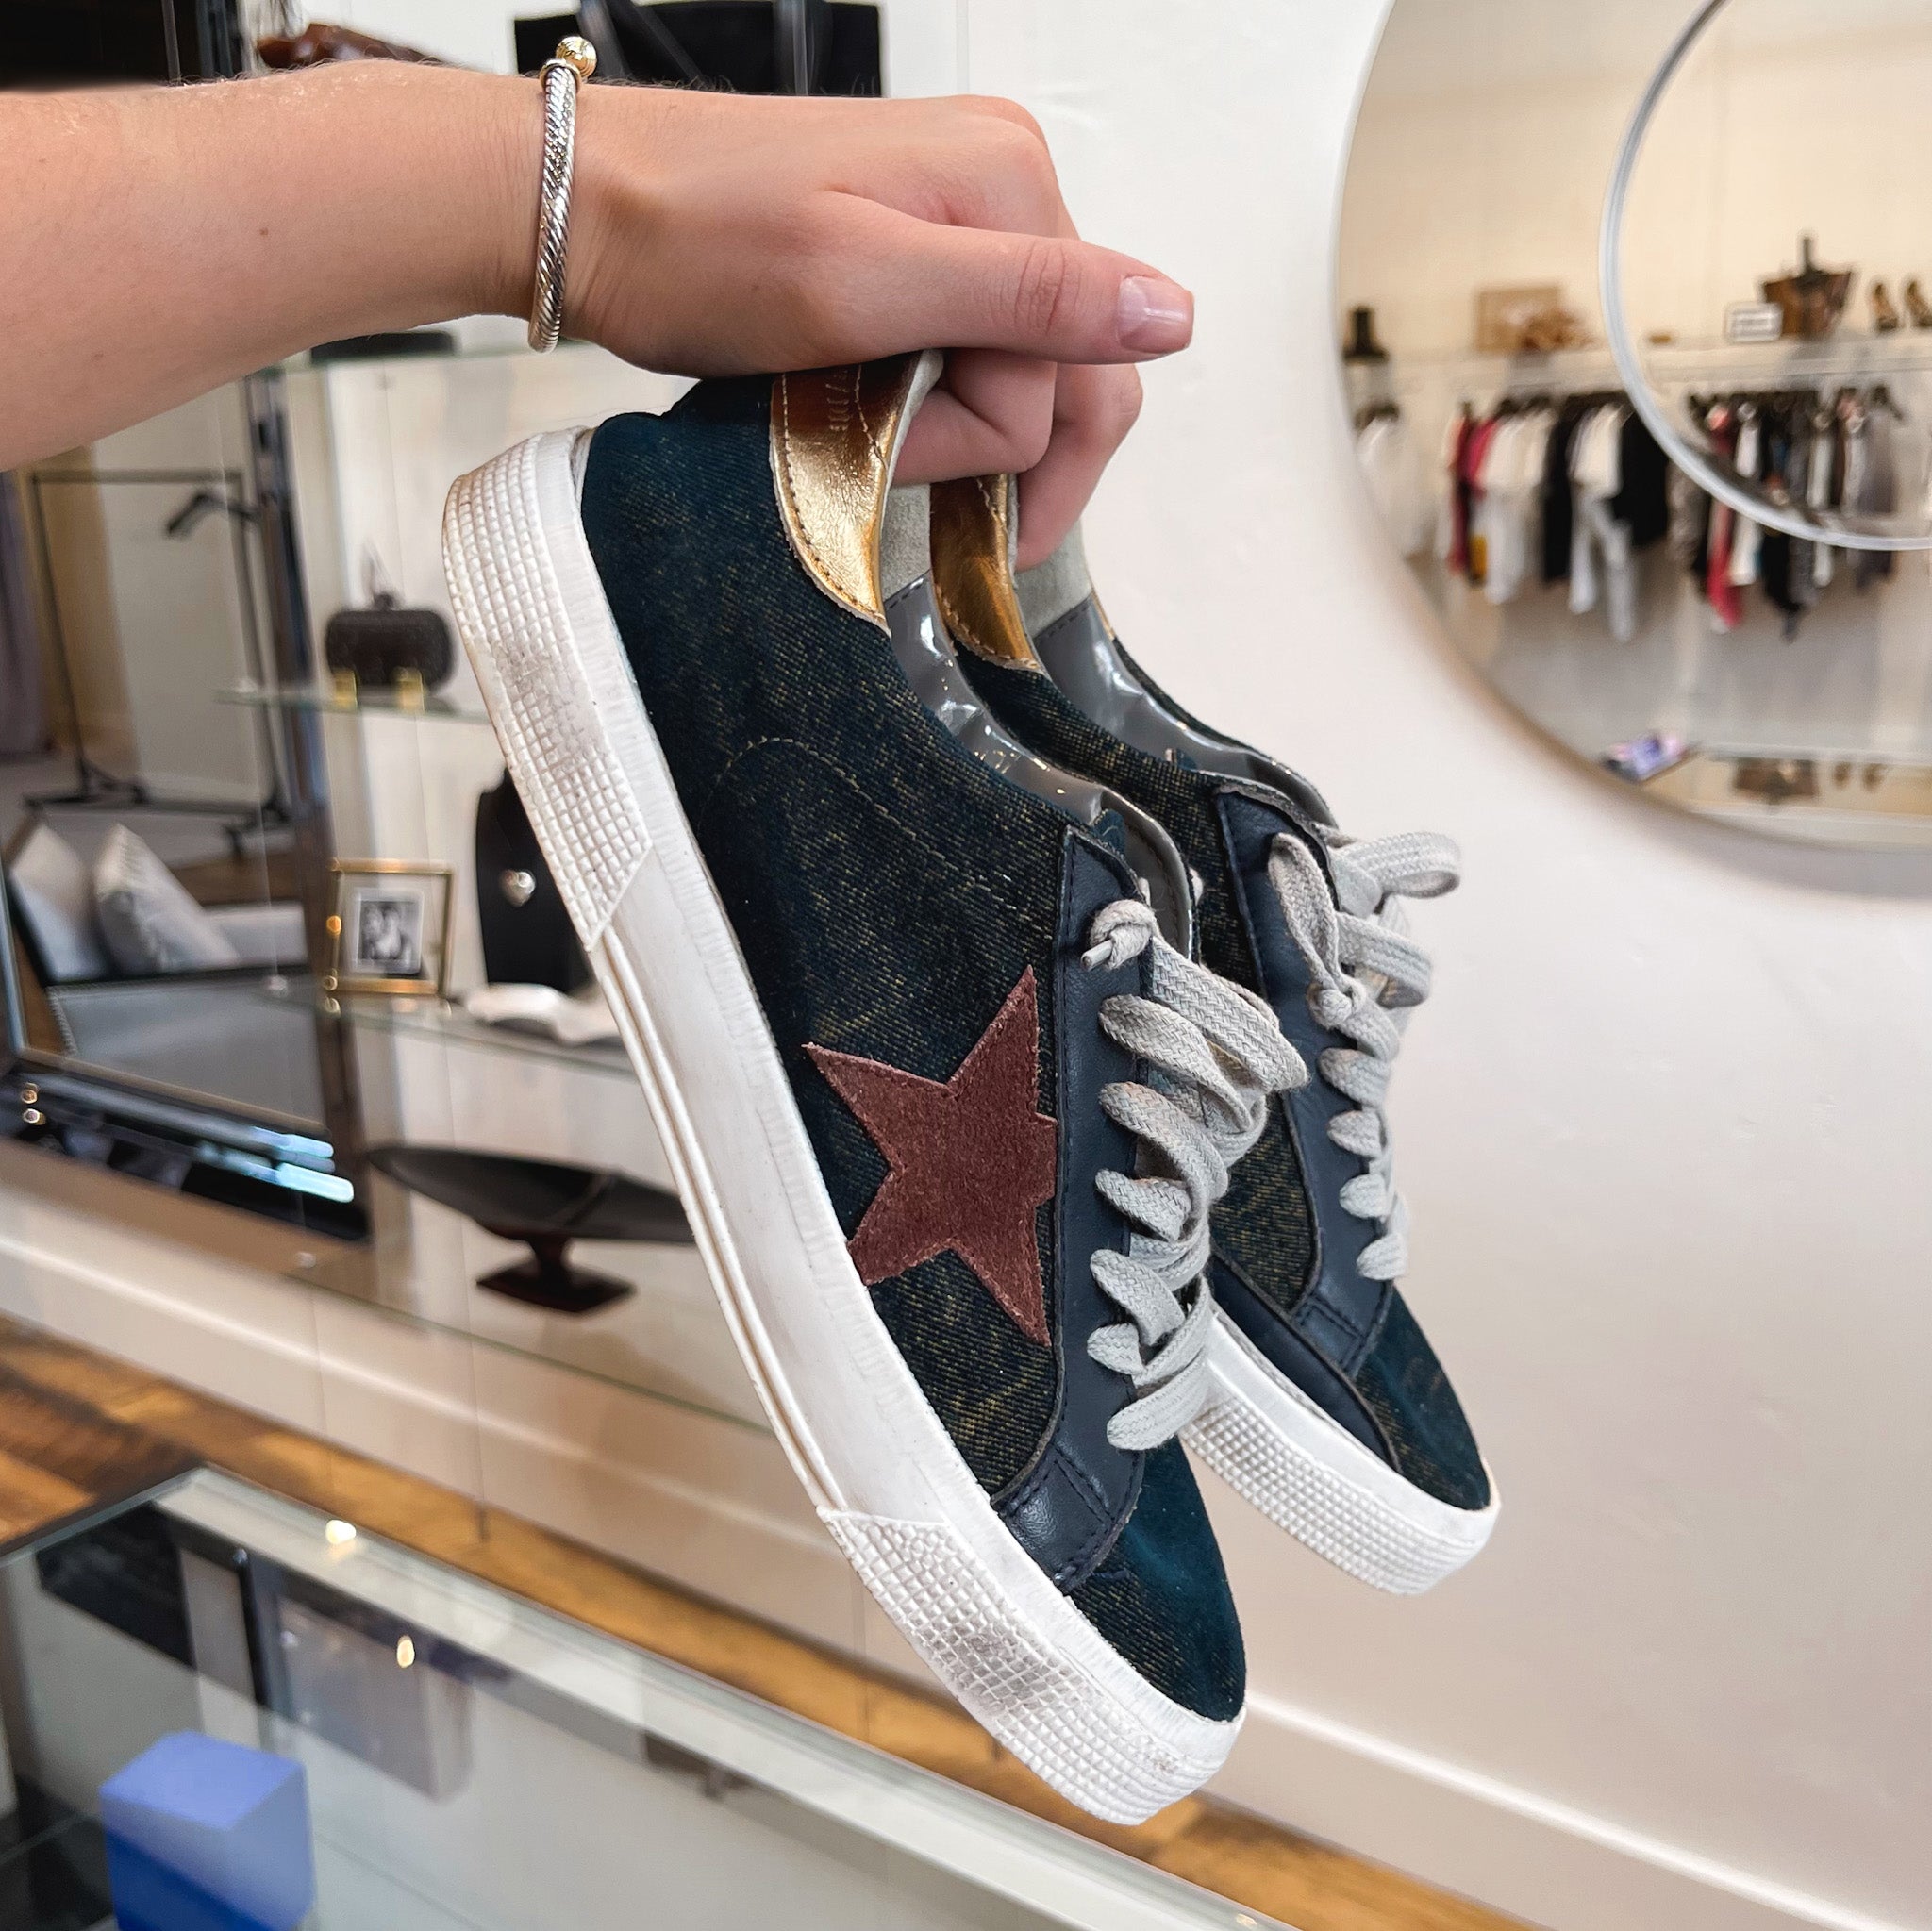 Golden Goose Sneakers - Kits, Kits boutique, Kits consignment, Kit's - women clothing, consignment, boutique, fashion, Denver, thrifting, thrift shop, designer, luxury, high-end, discount, deals